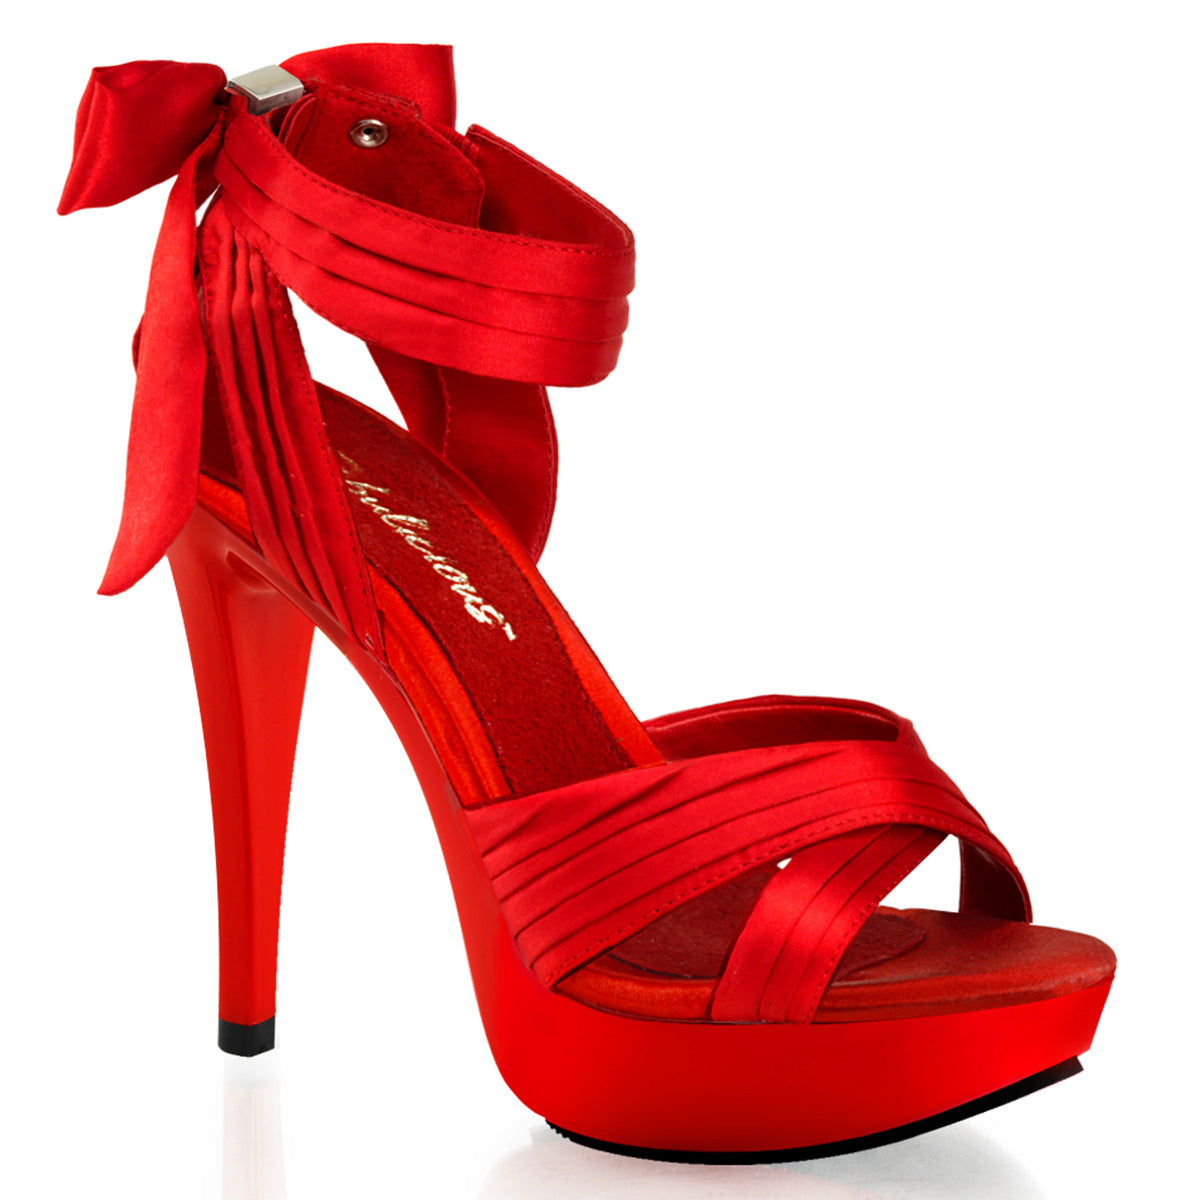 COCKTAIL-568 Red Satin/Red Sandals